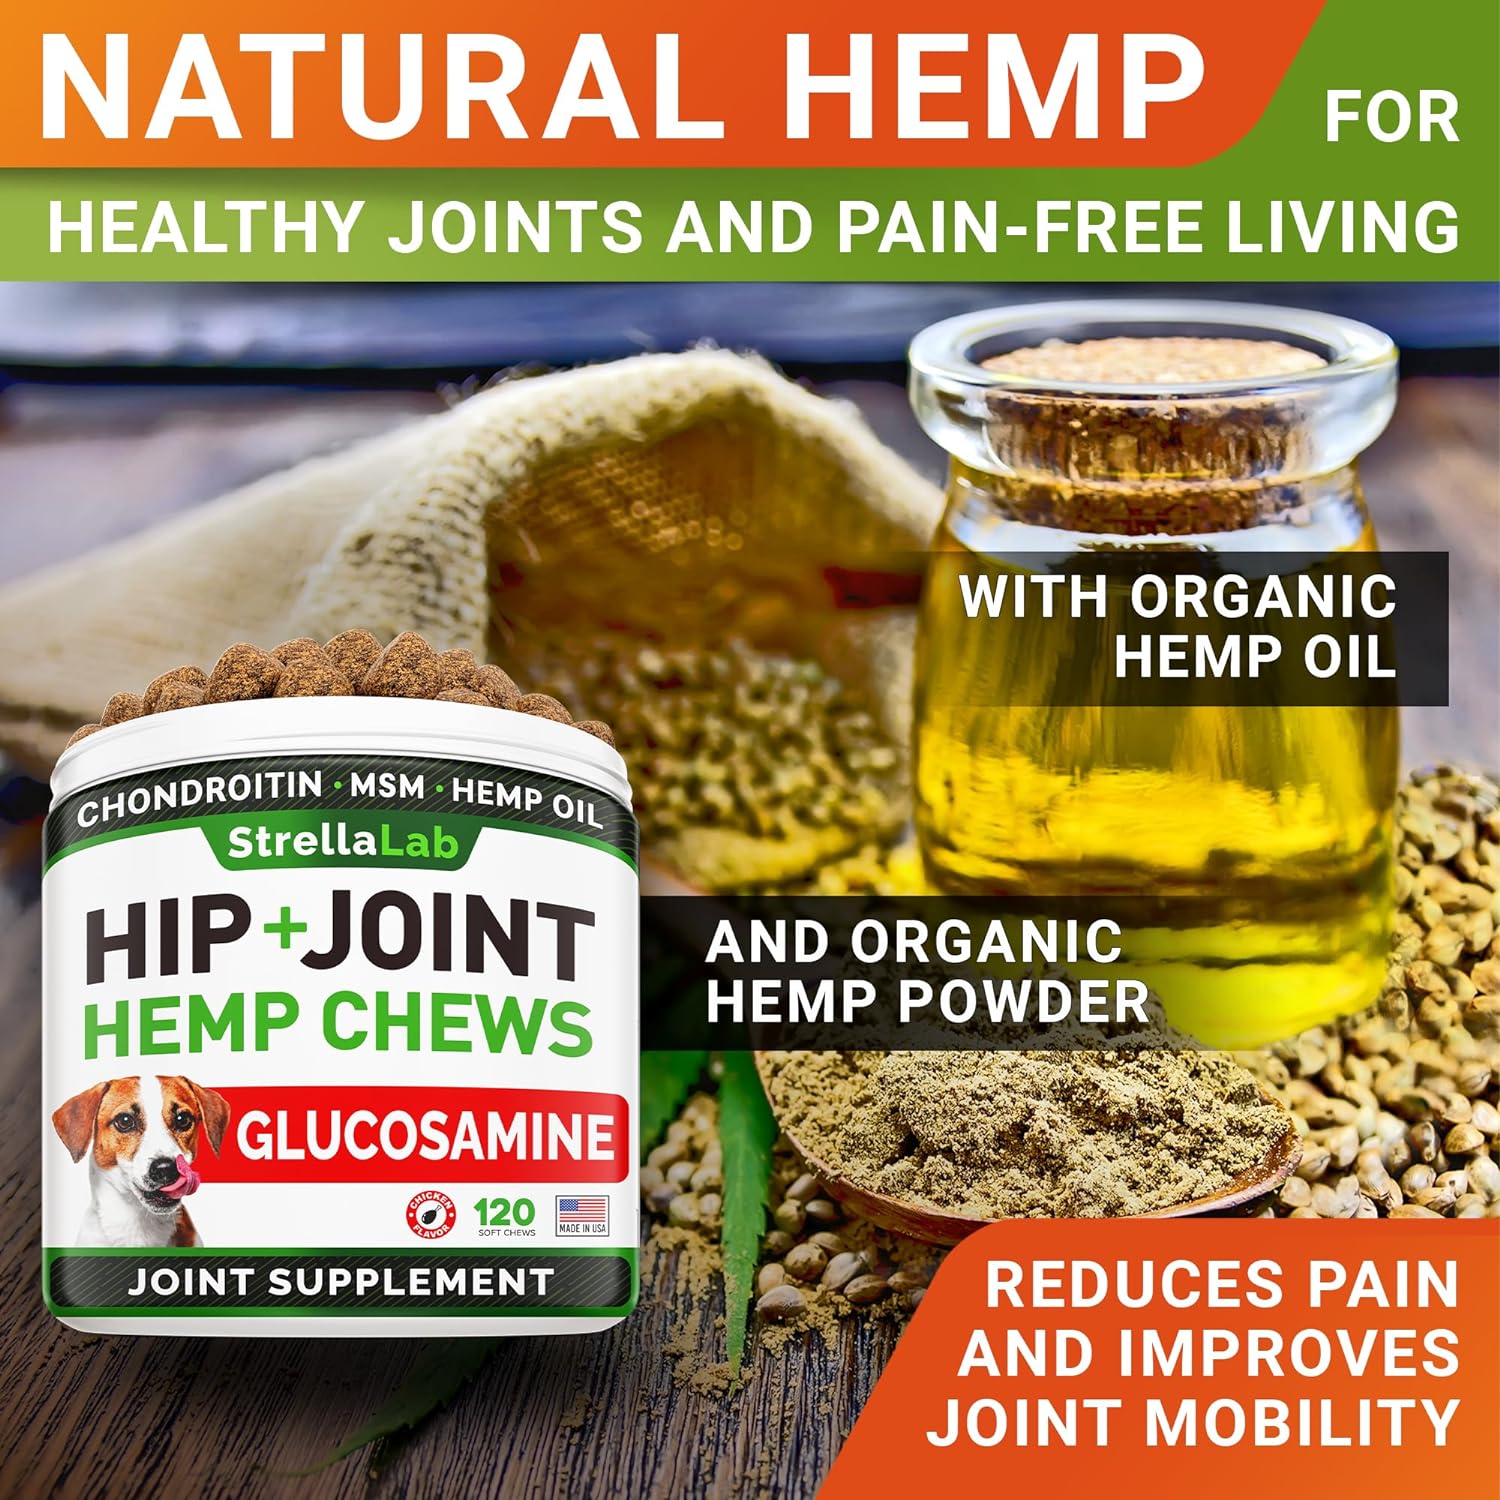 Hemp Treats - Glucosamine Dog Joint Supplement + Omega 3 - w/Hemp Oil - Chondroitin, MSM - Advanced Mobility Chews - Joint Pain Relief - Hip & Joint Care - Chicken Flavor - 120 Ct - Made in USA : Pet Supplies